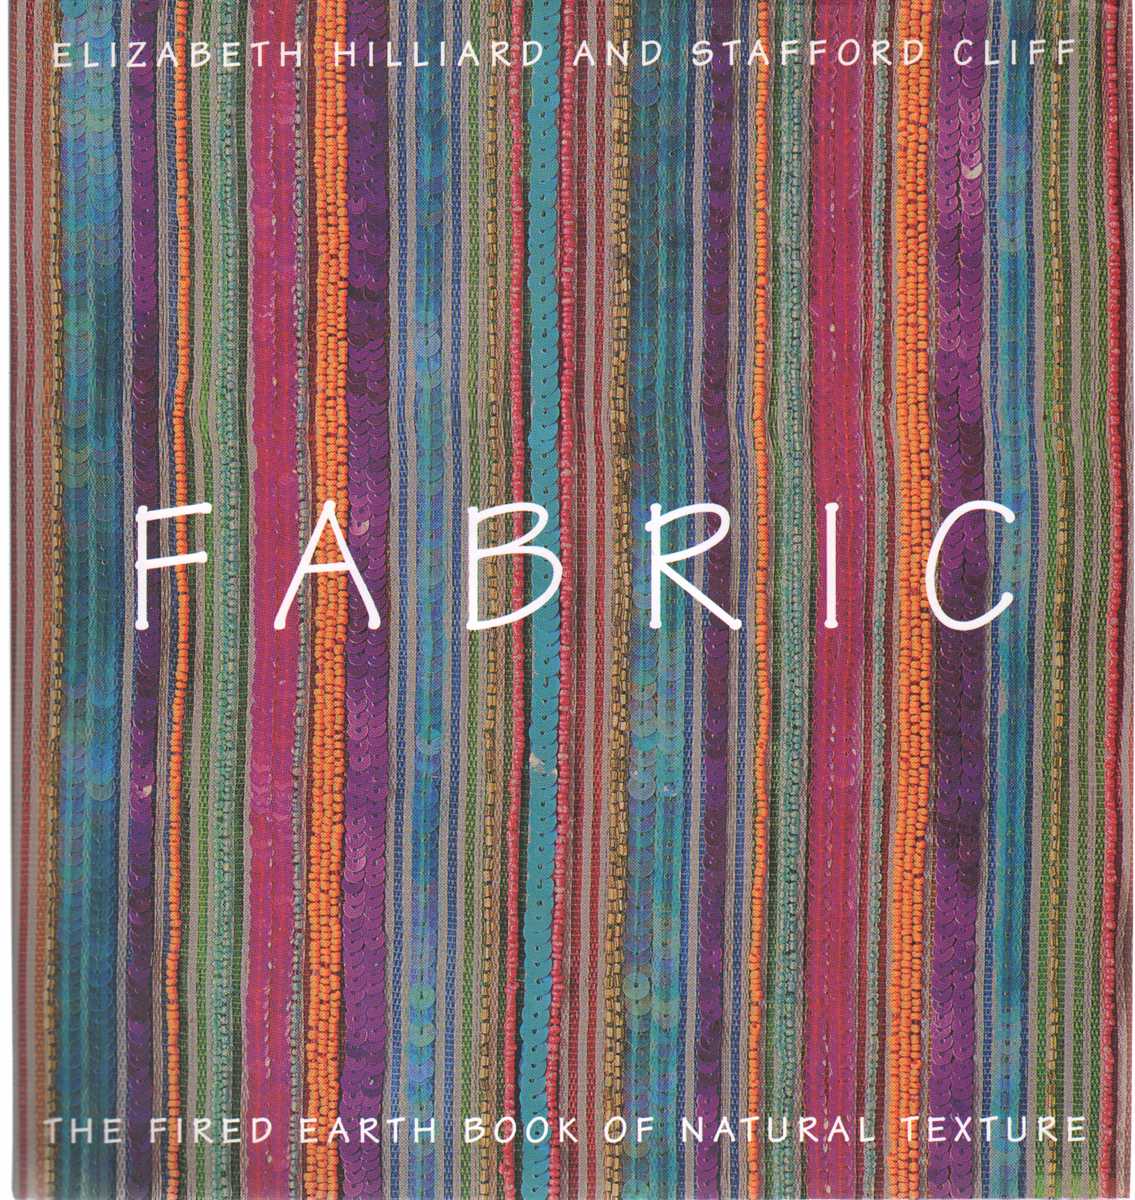 Hilliard, Elizabeth & Stafford Cliff - FABRIC The Fired Earth Book of Natural Texture